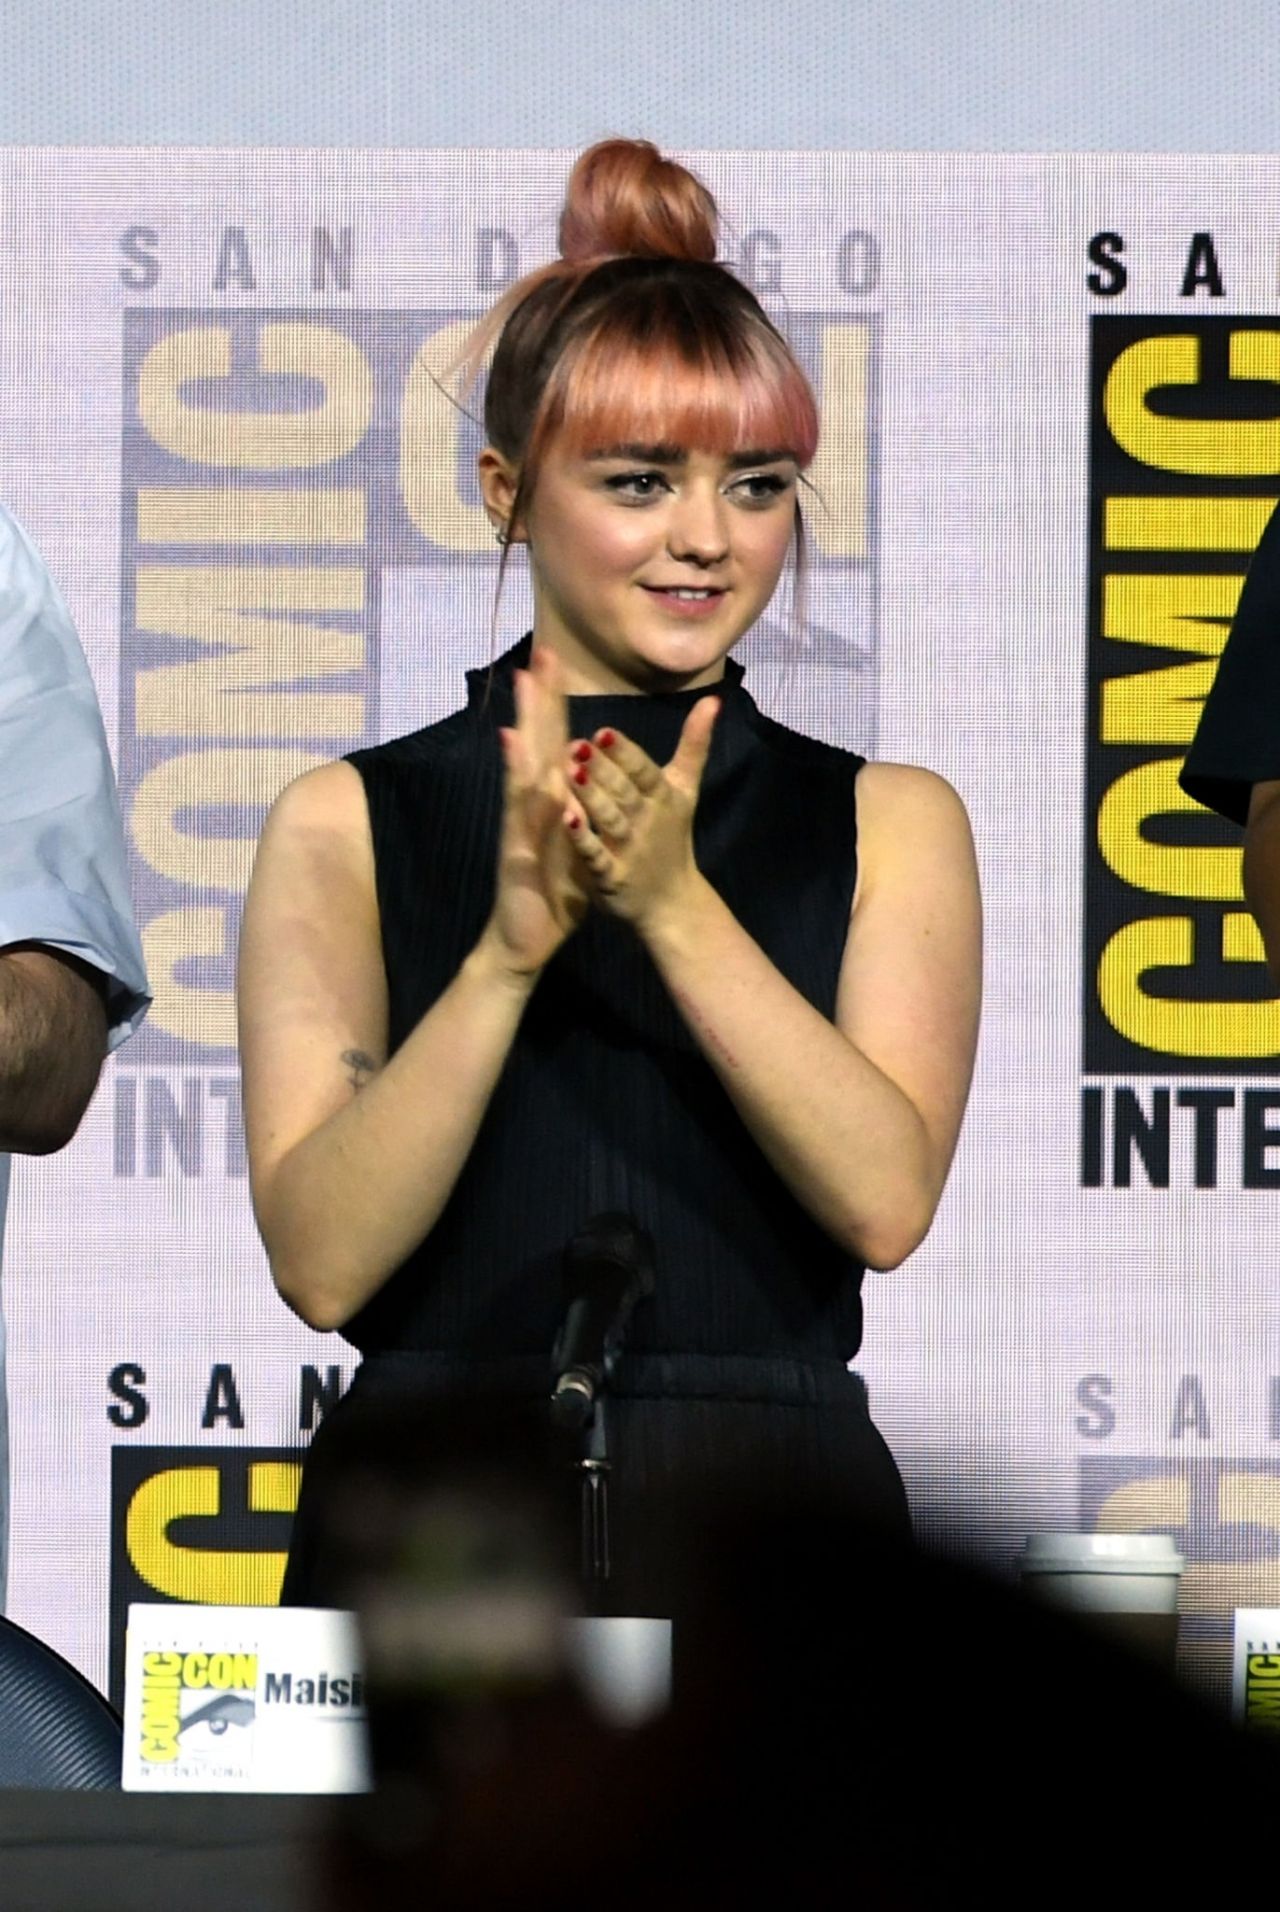 maisie-williams-game-of-thrones-panel-q-a-at-sdcc-2019-0.jpg